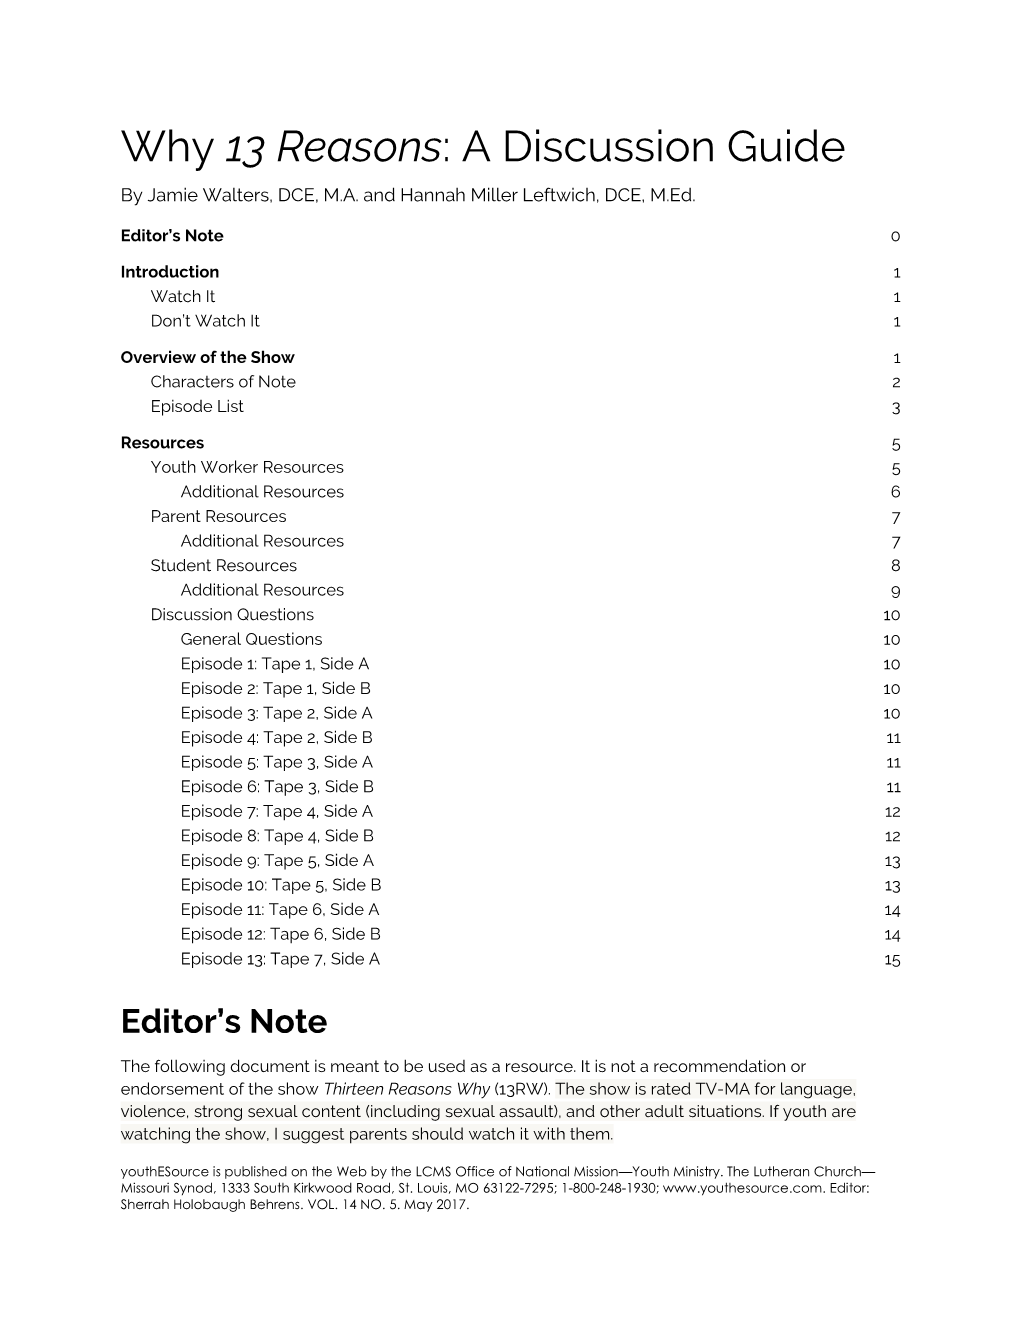 Why 13 Reasons: a Discussion Guide by Jamie Walters, DCE, M.A